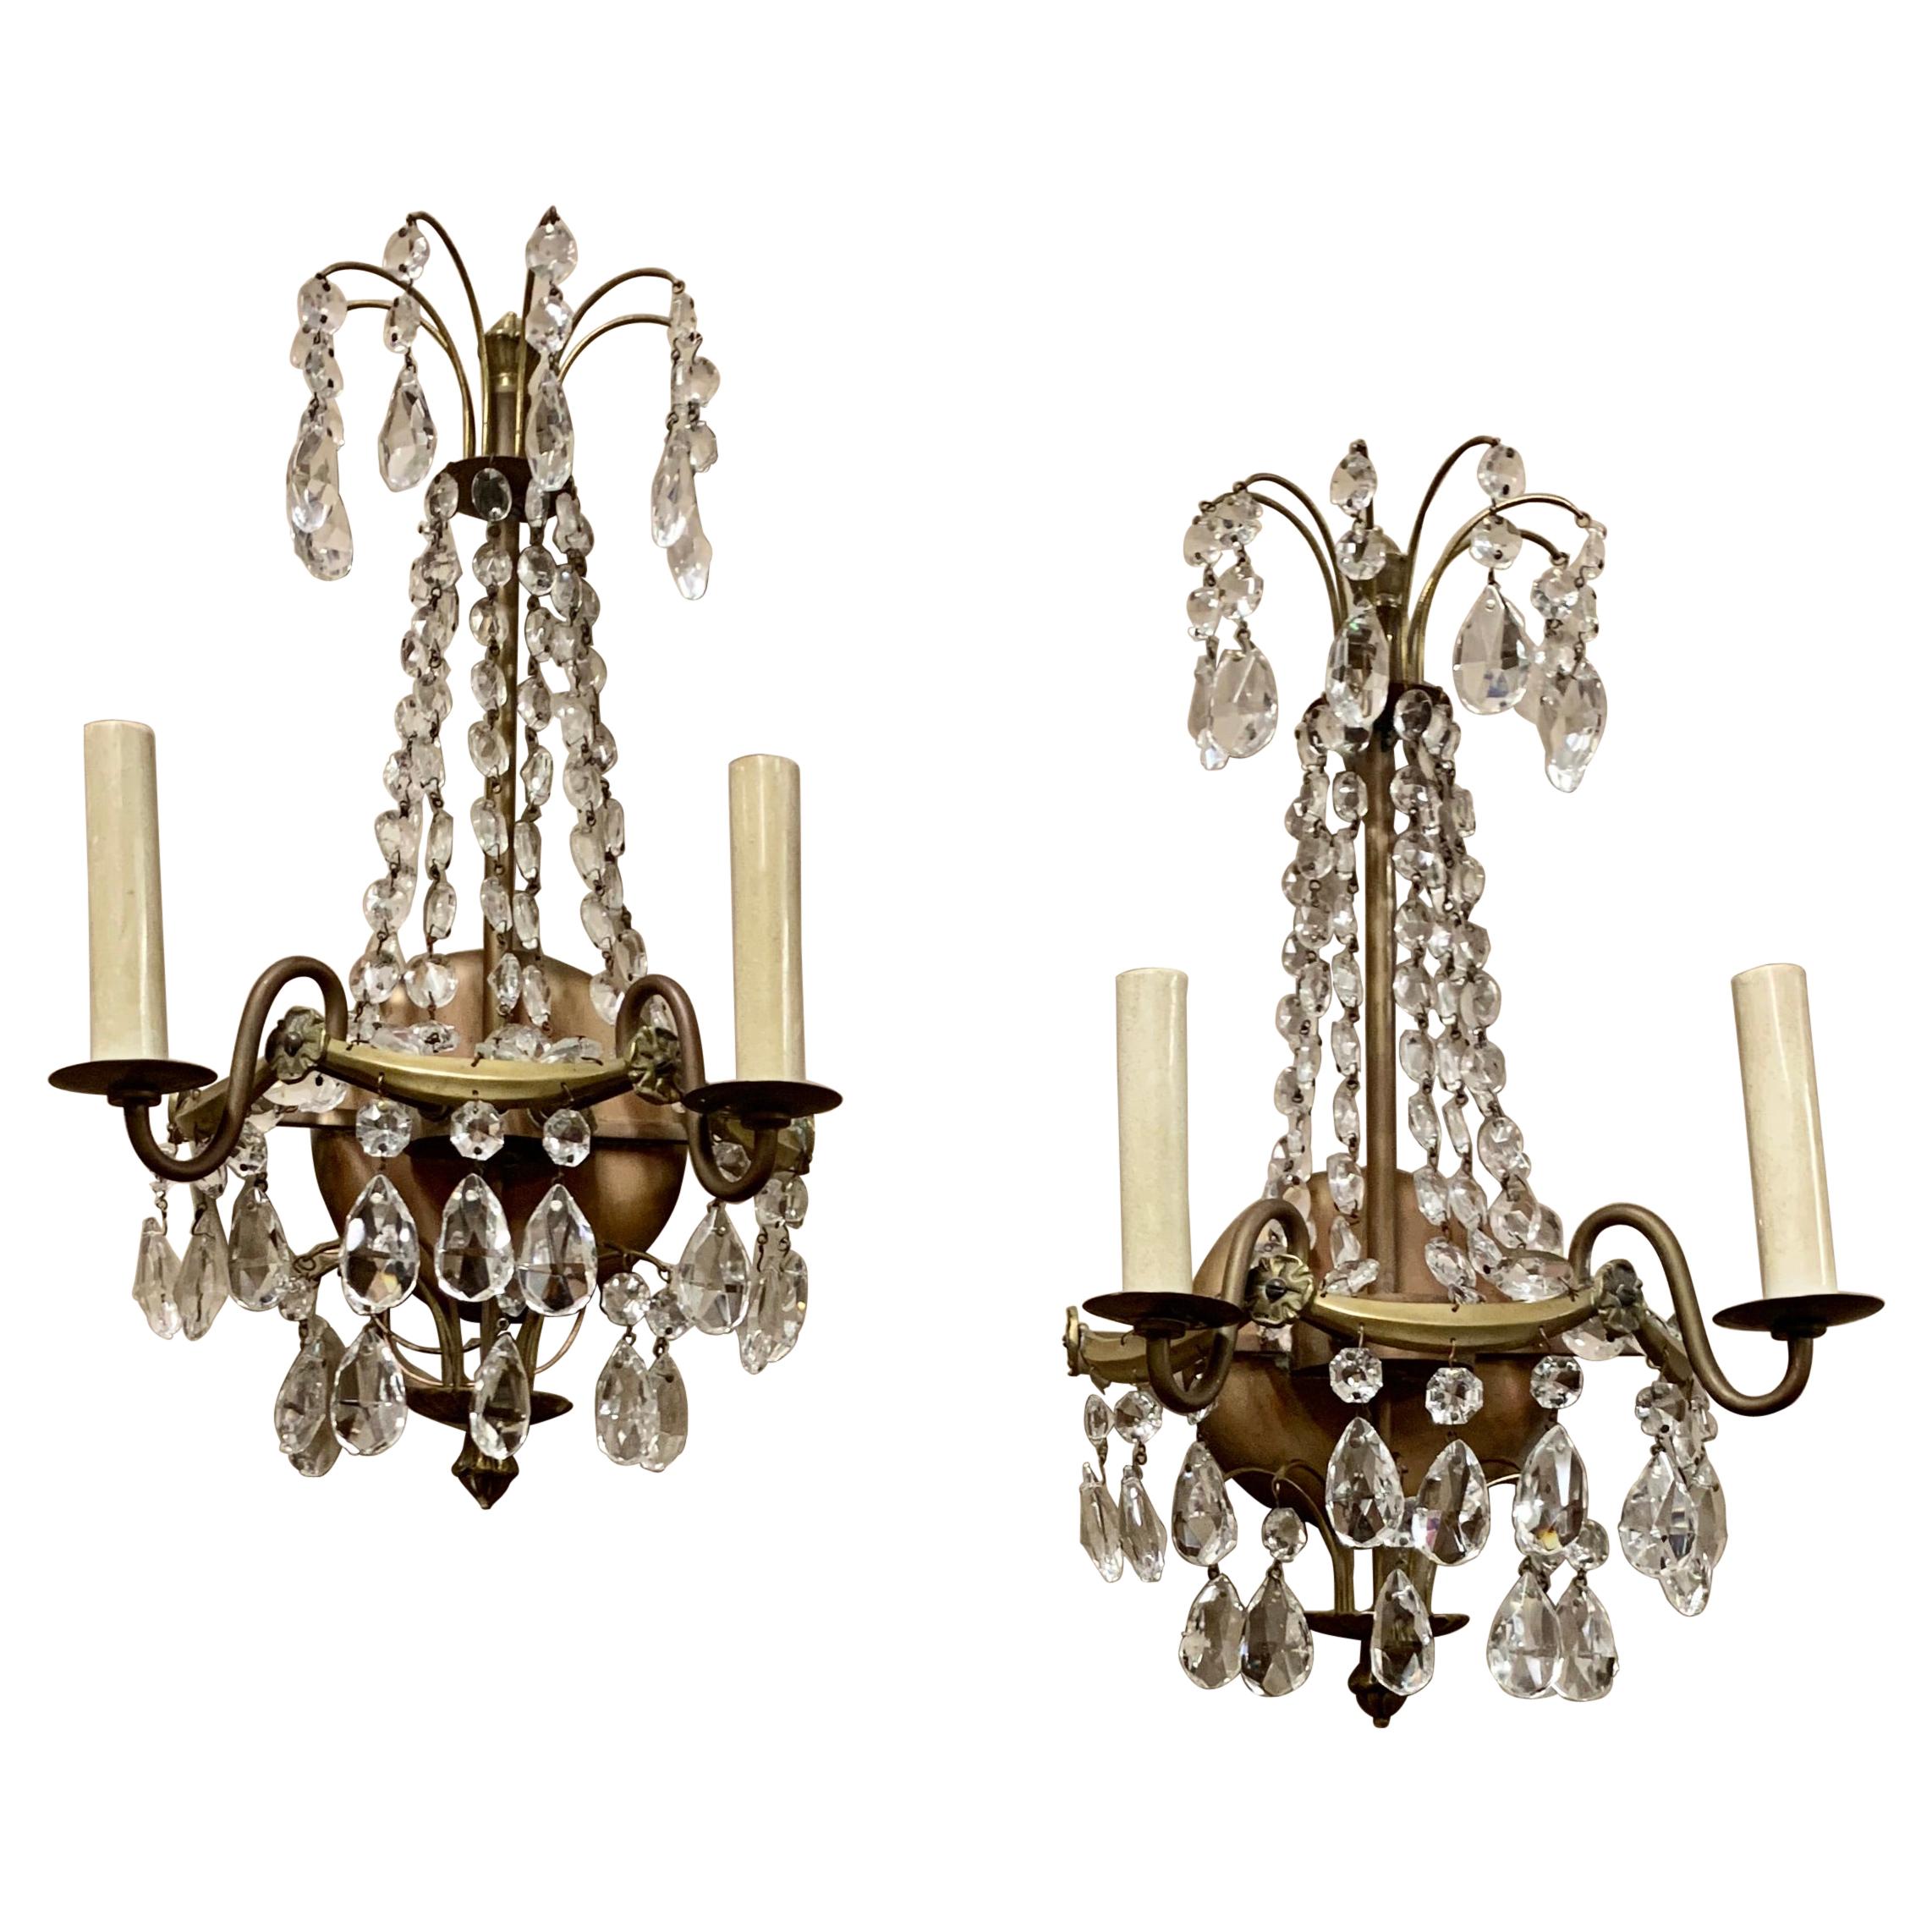 Two Light Swedish Gustavian Sconces in Crystal & Bronze, A Pair